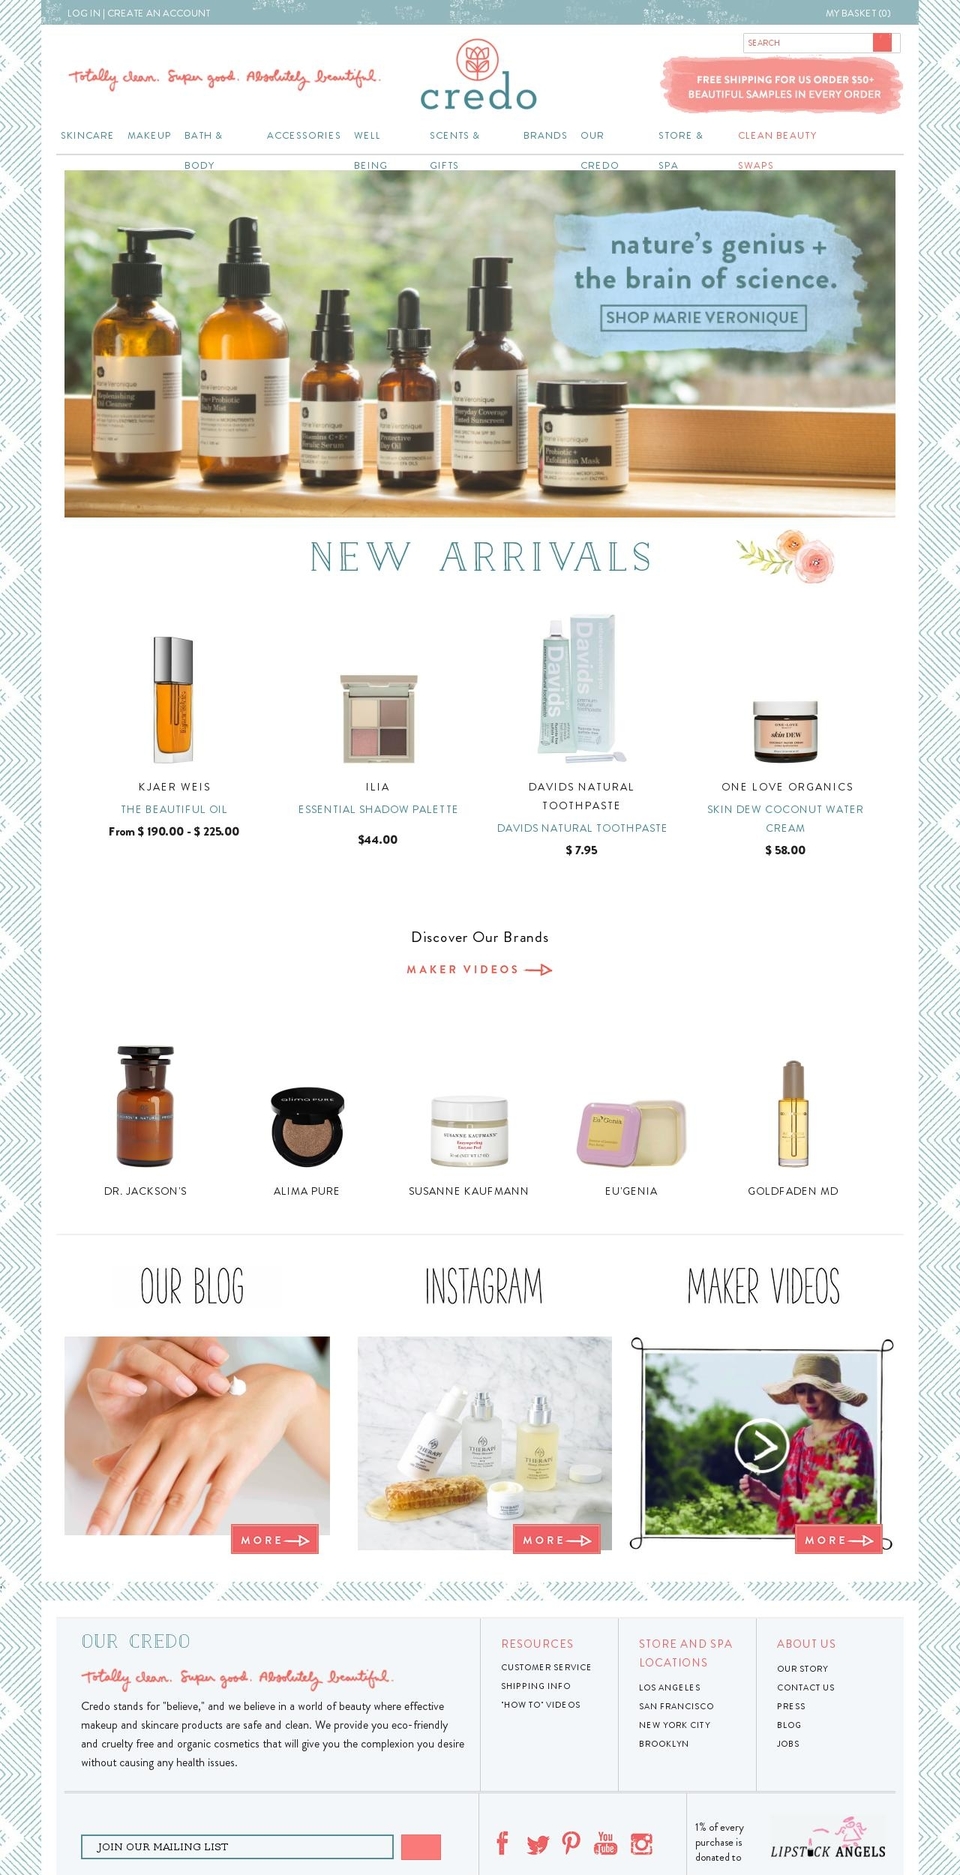 . Ingredient Campaign Revert Shopify theme site example credobeauty.com